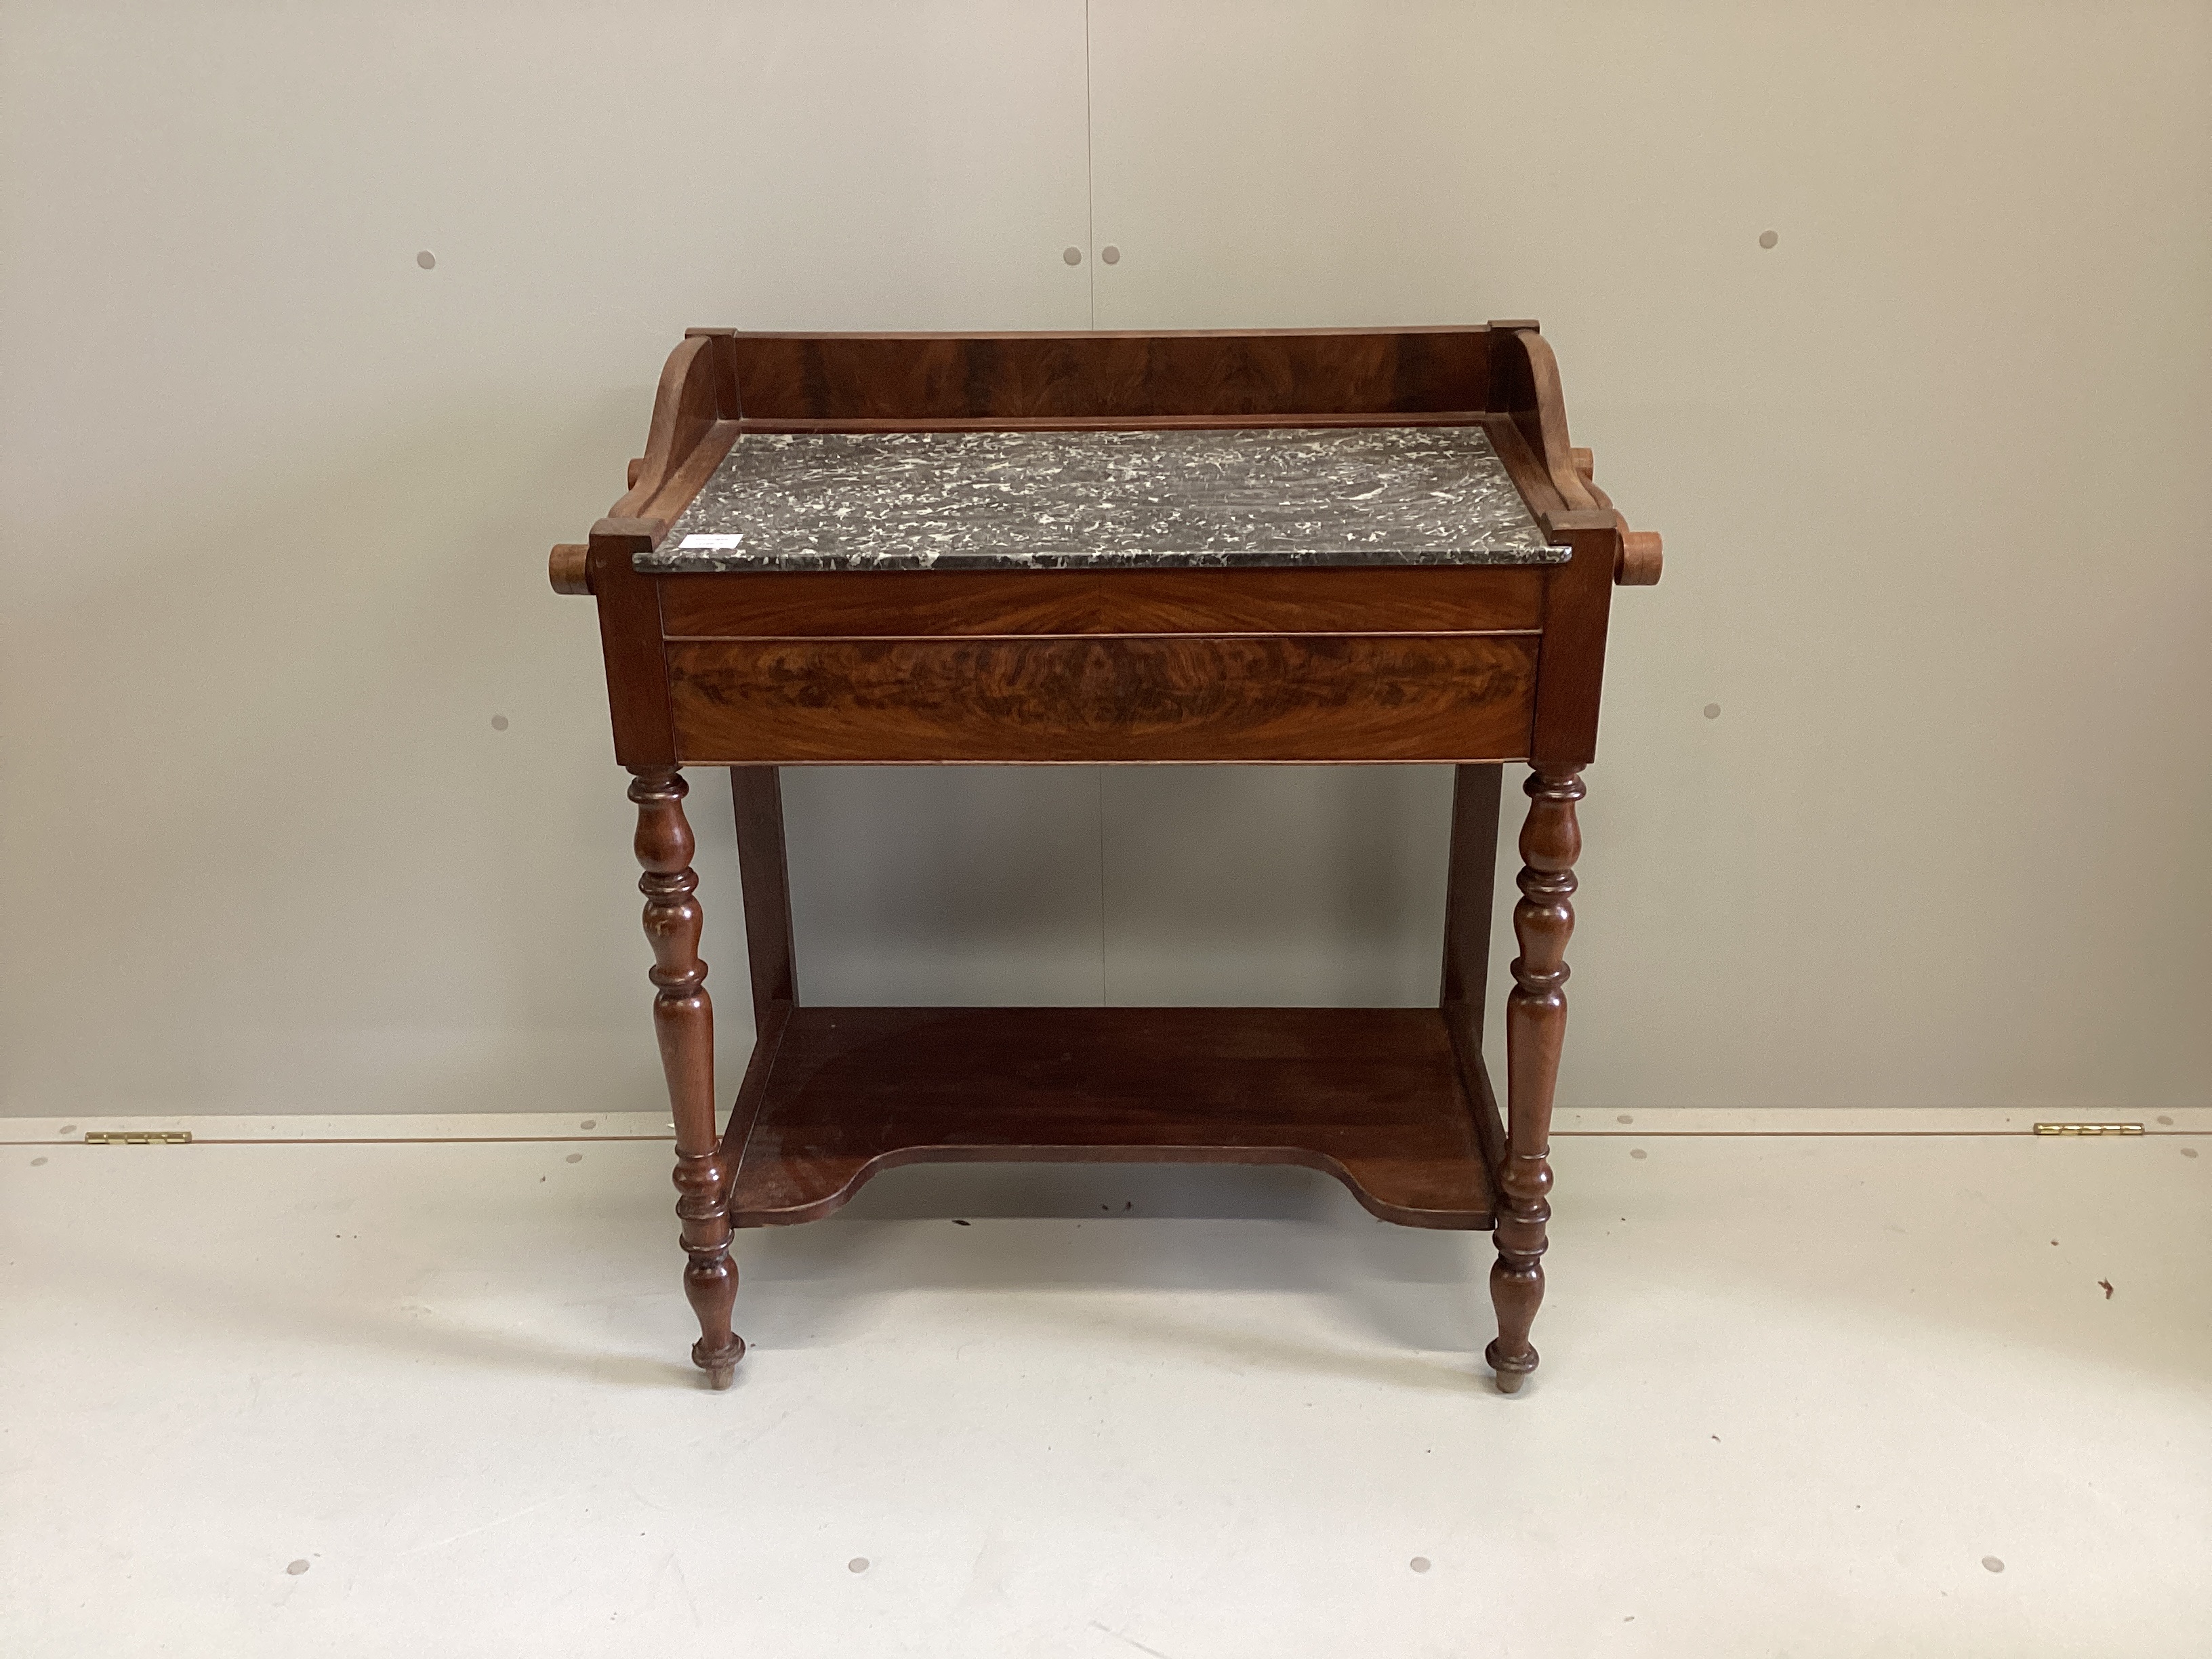 A 19th century French mahogany marble top washstand, width 82cm, depth 38cm, height 84cm